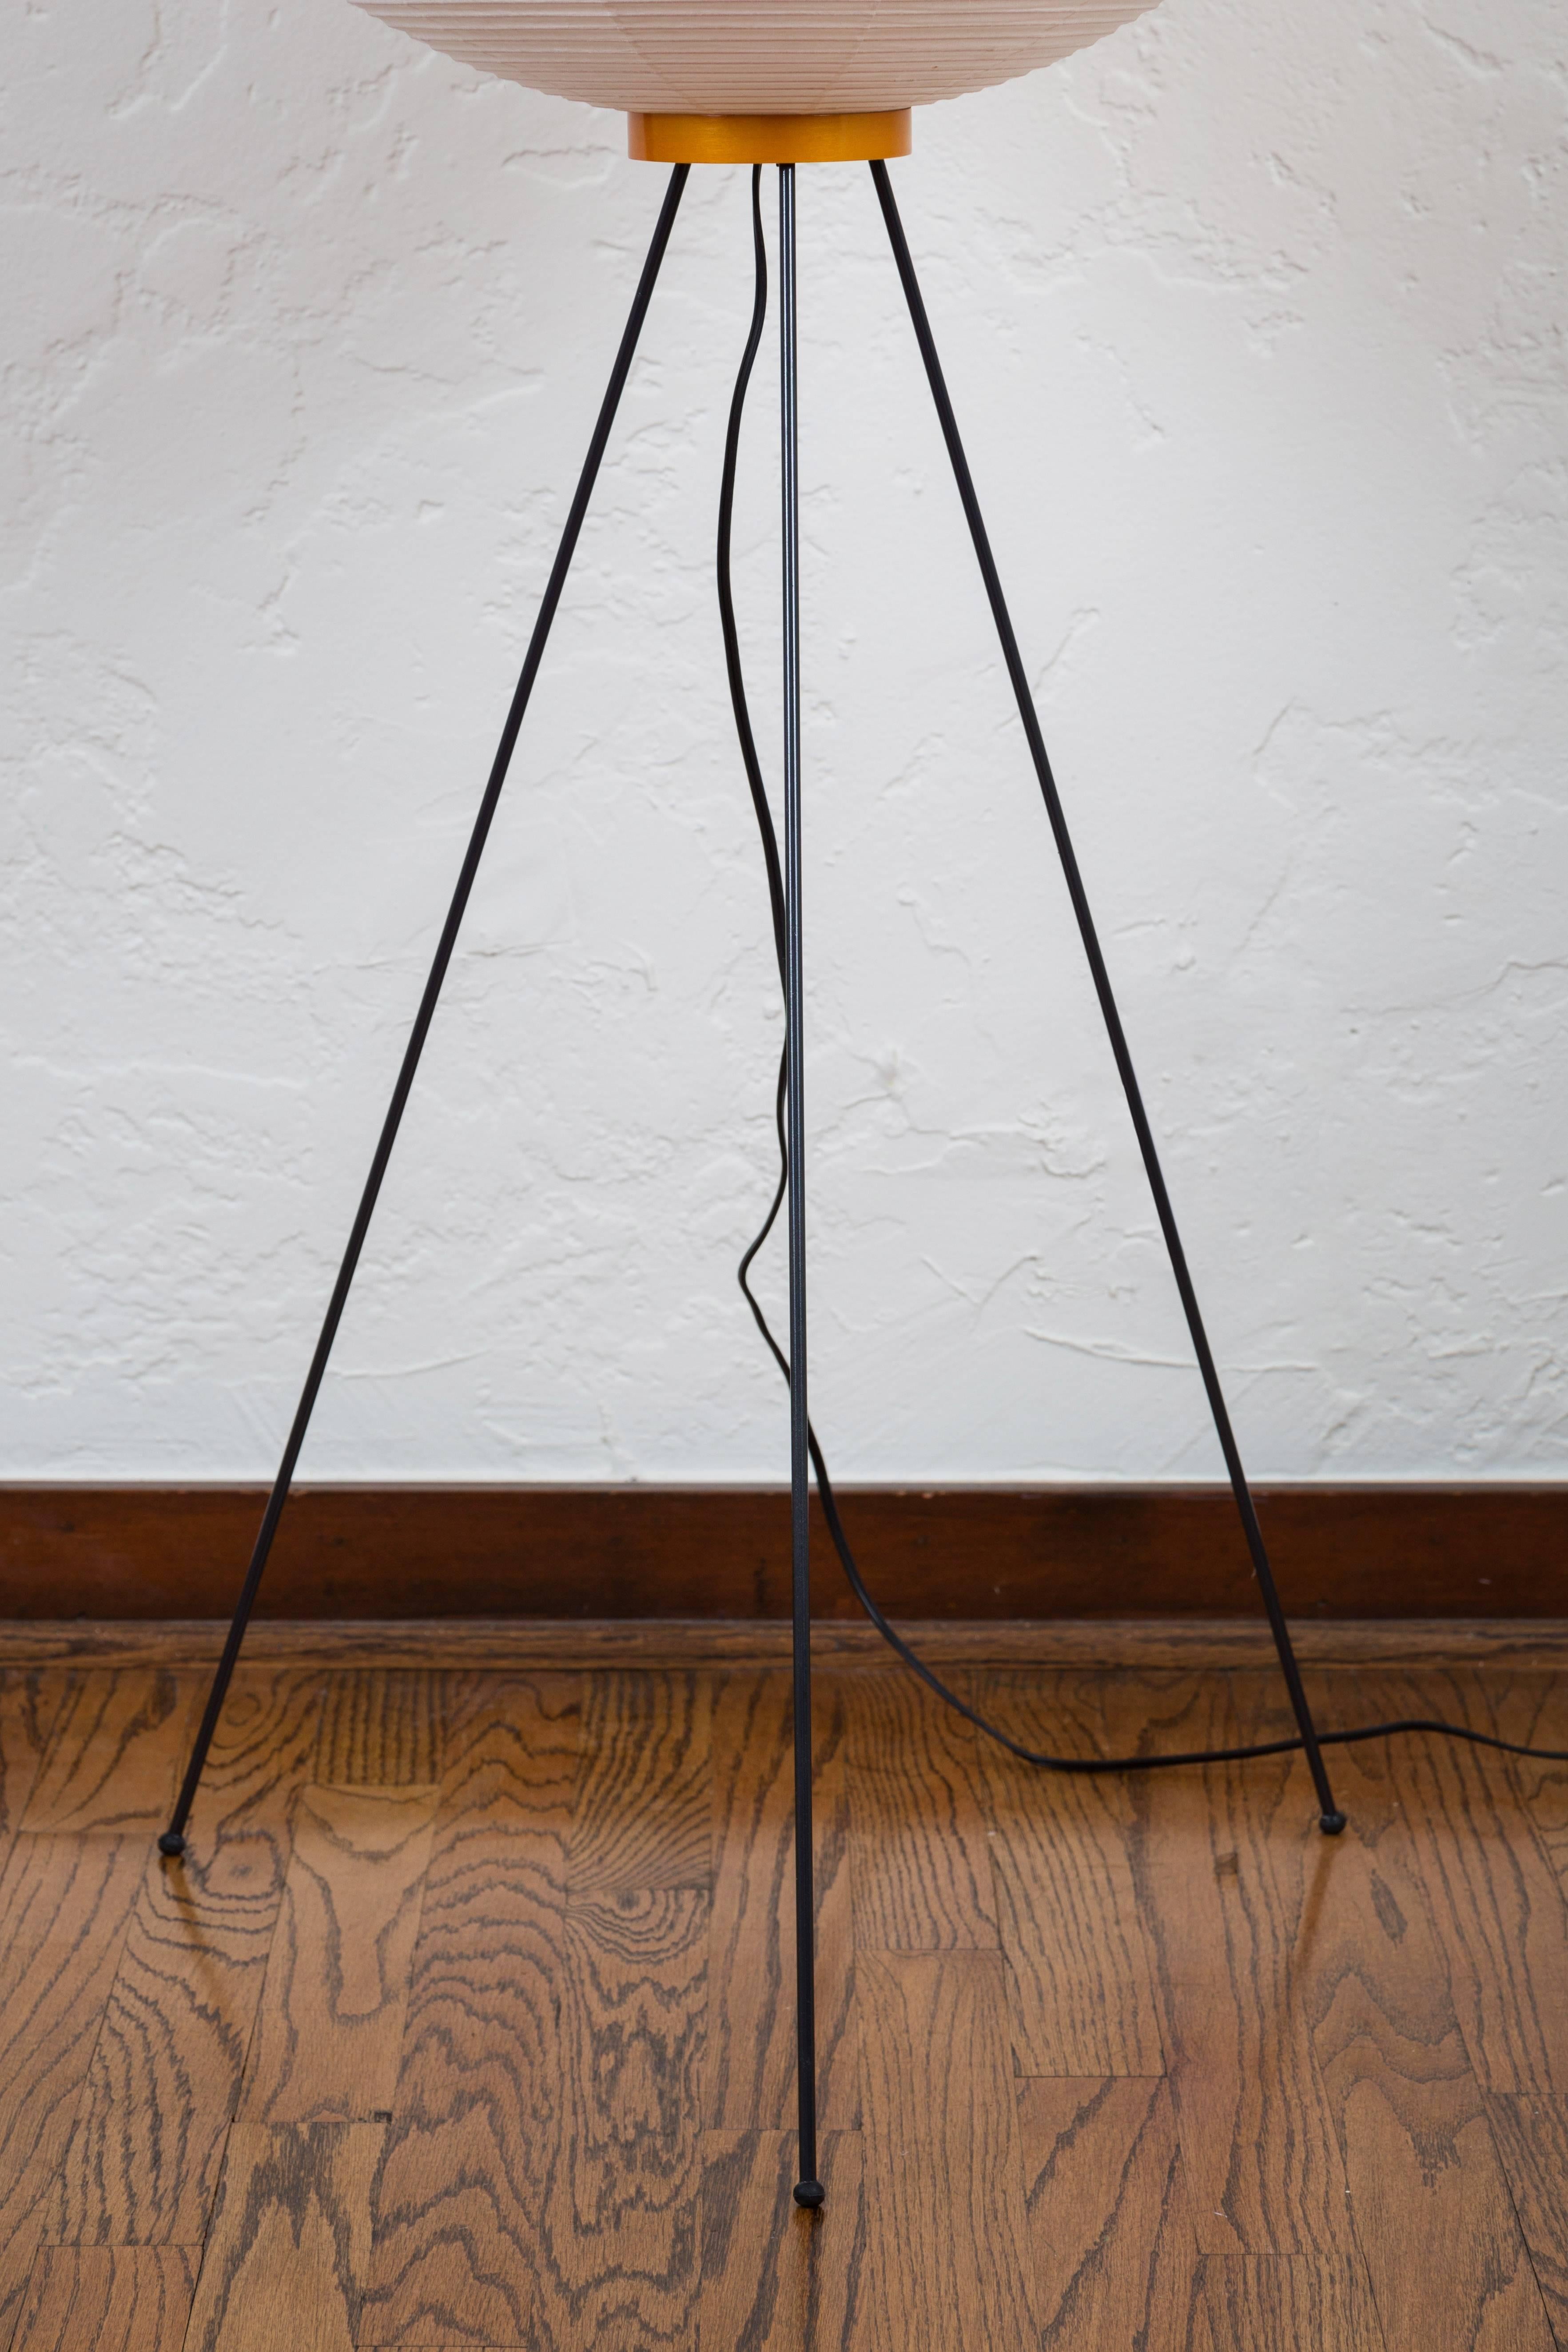 Pair of Akari 10A floor lamps by Isamu Noguchi. The shade is made from handmade washi paper and bamboo ribs with Noguchi Akari manufacturer's stamp. Akari light sculptures by Isamu Noguchi are considered icons of 1950s modern design. Designed by